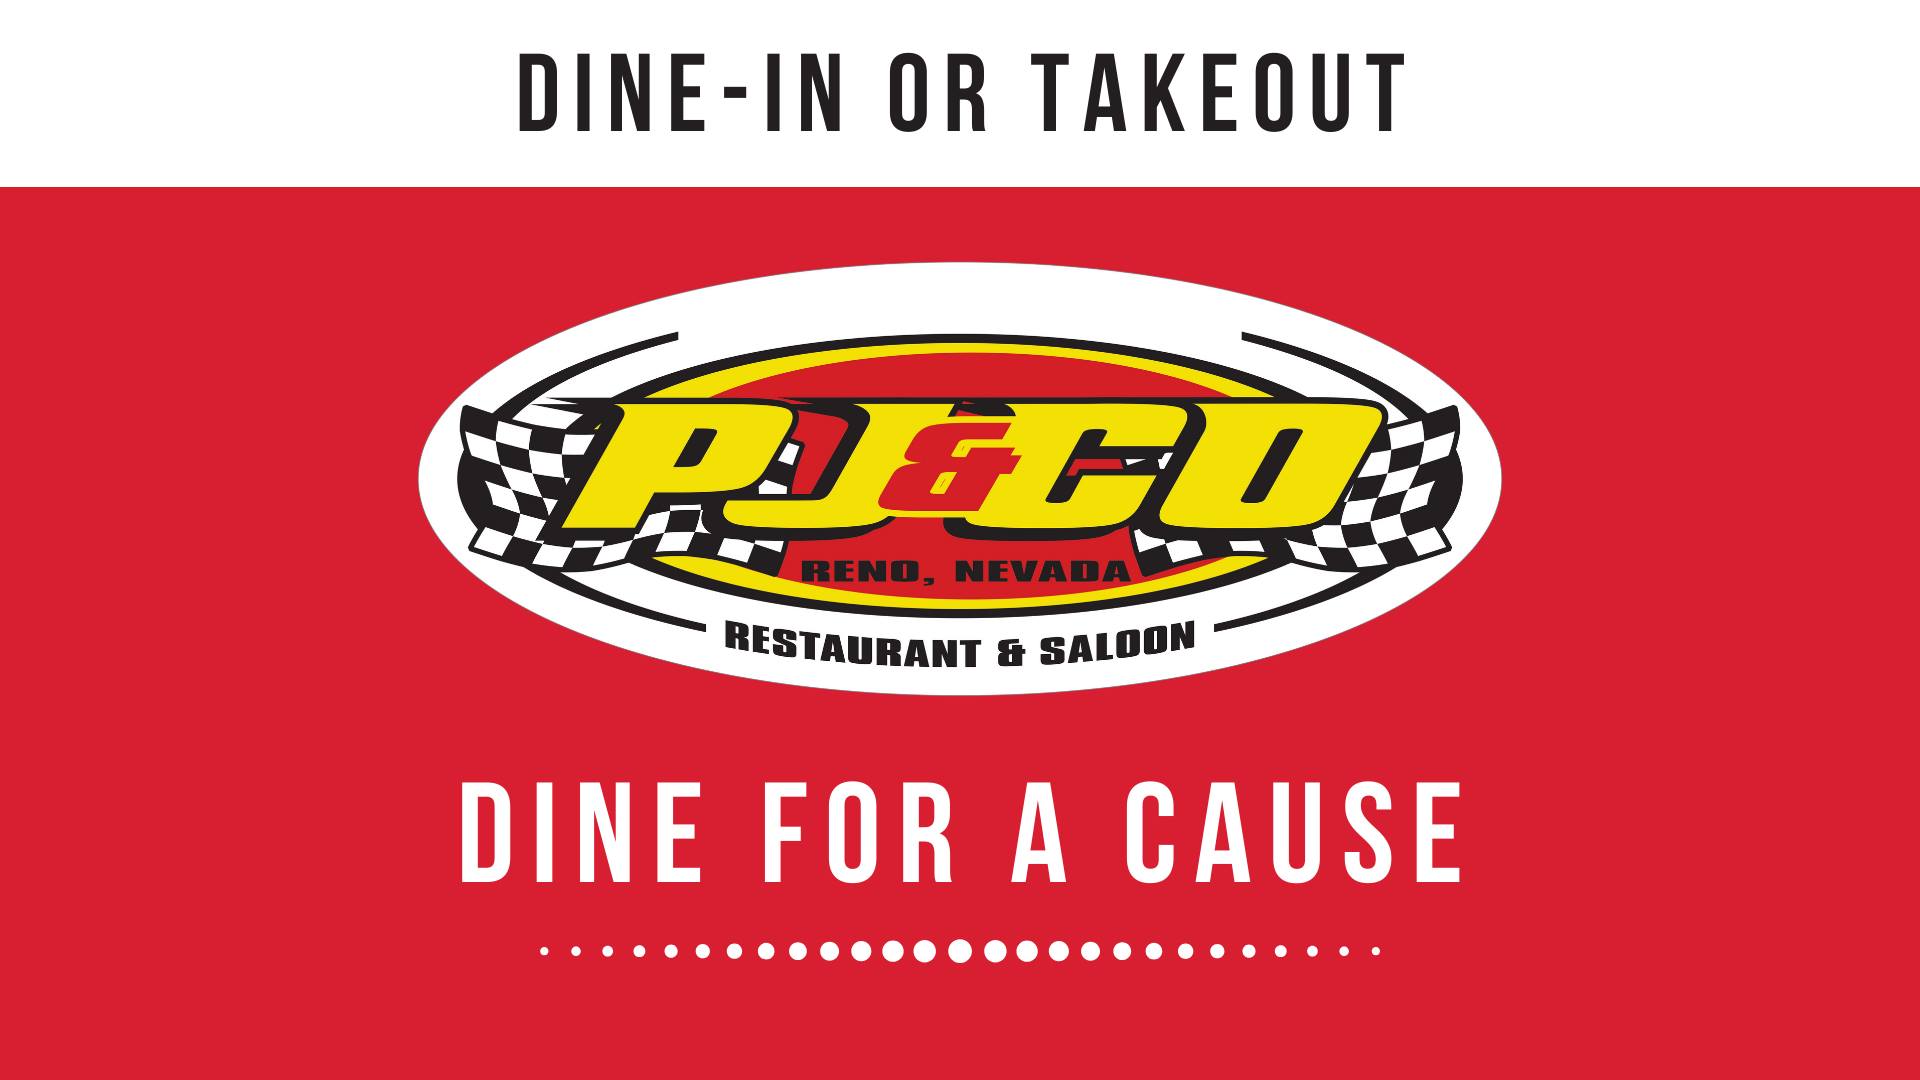 dine for a cause